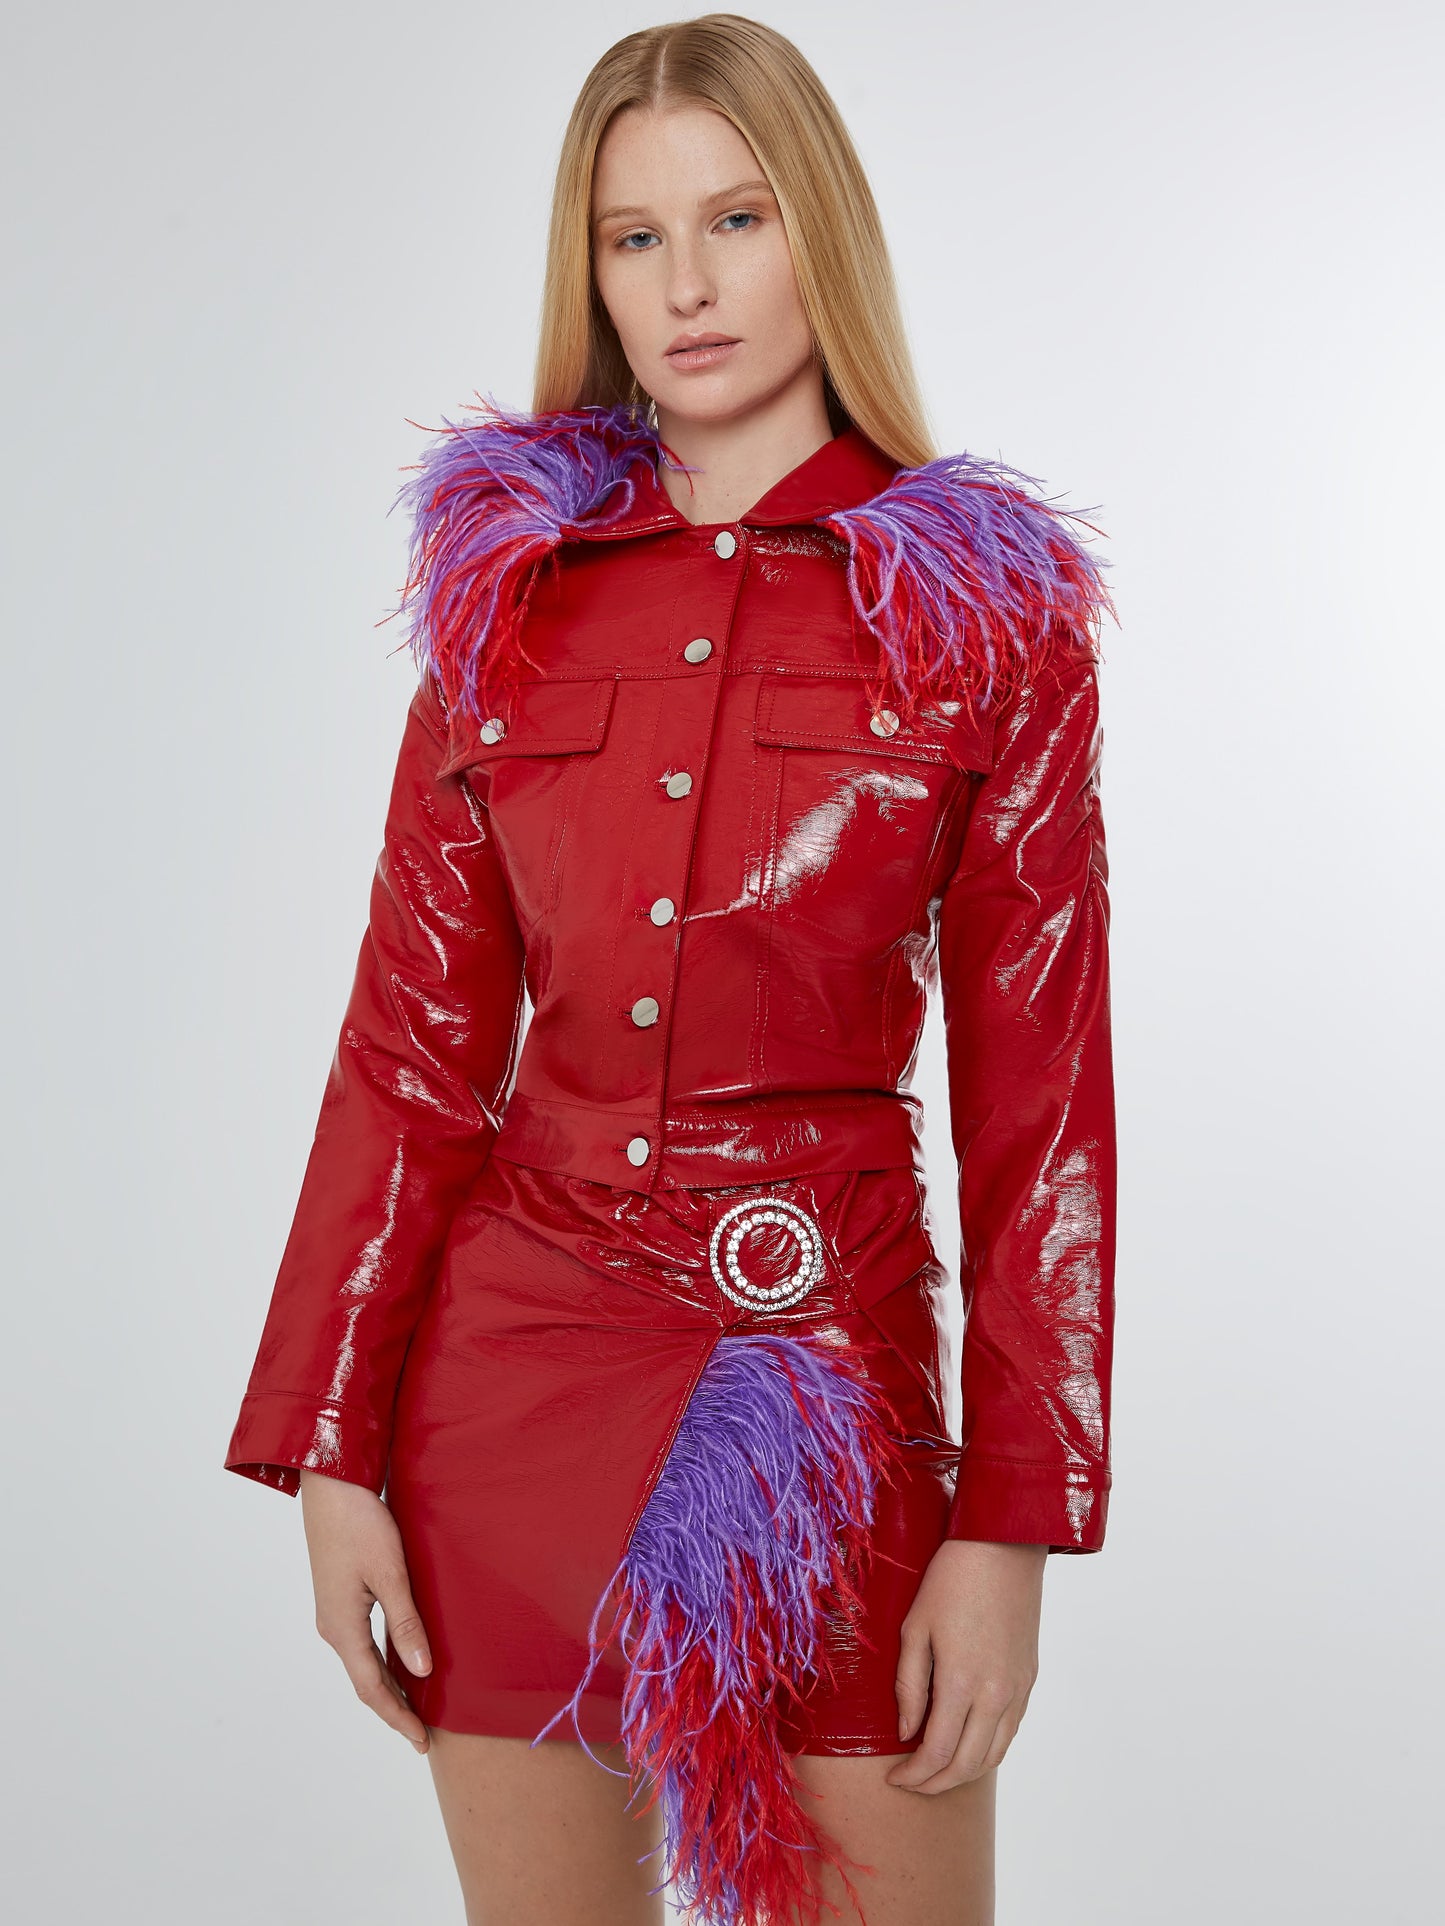 Red vinyl cropped jacket with purple/ red feathered collar